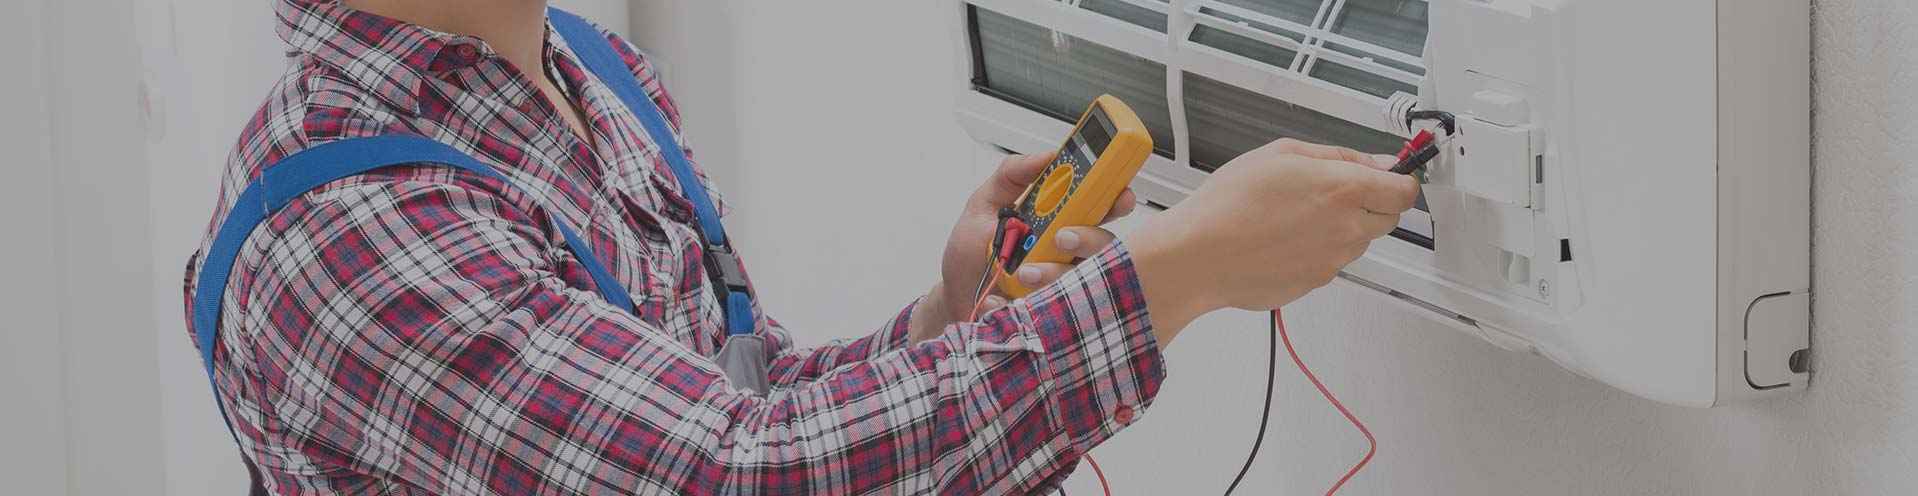 The 10 Best Air Conditioning and Heating Experts in Mundaring, WA - Oneflare